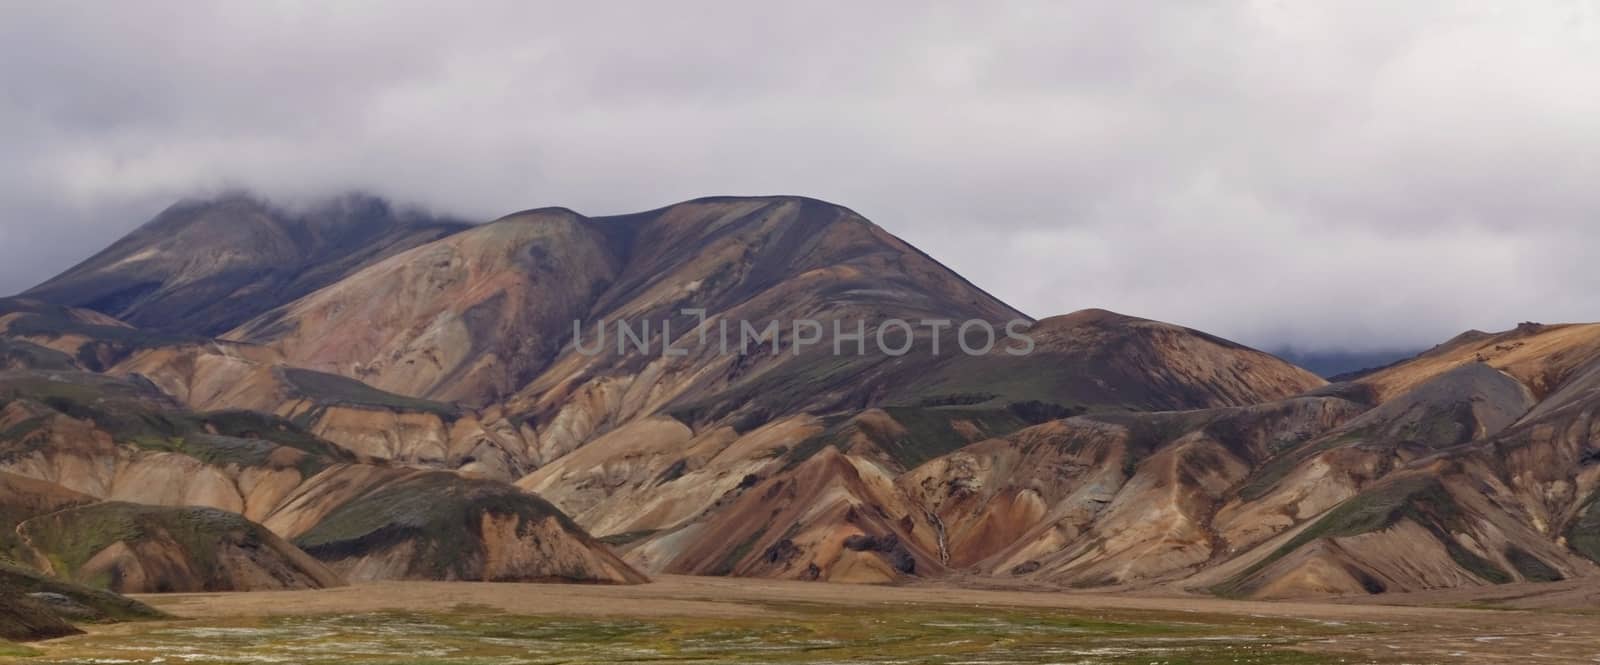 Landscape in Iceland by jnerad